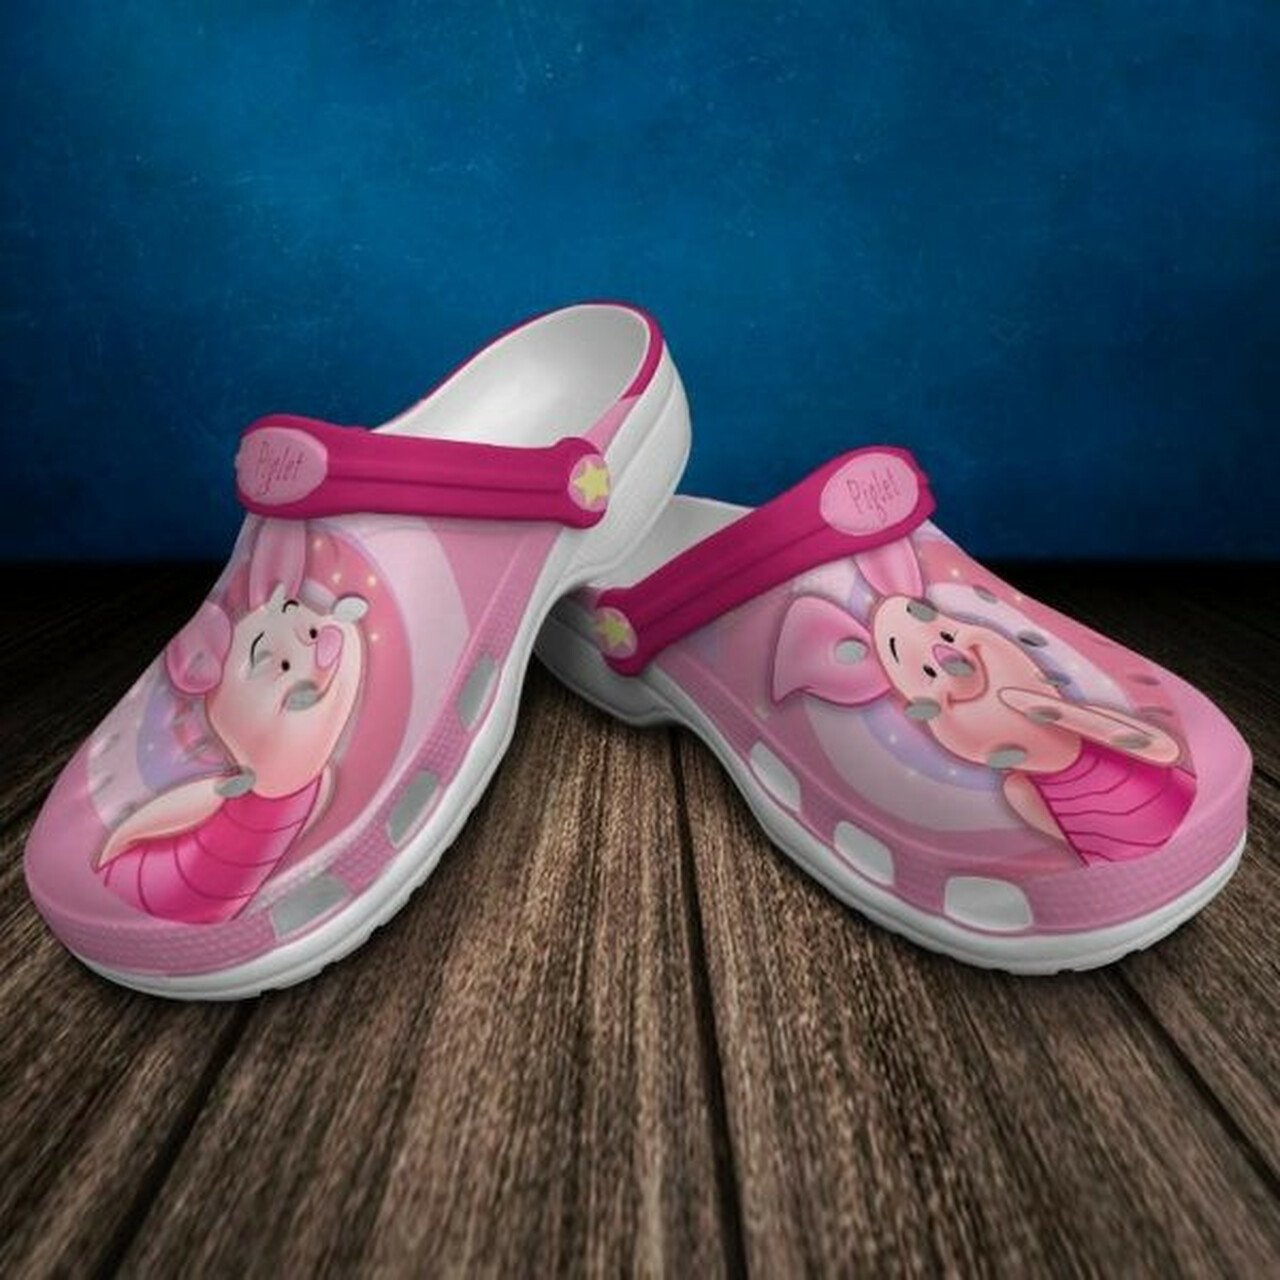 Piglet Crocss Crocband Clog Comfortable Water Shoes In Pink For Girls